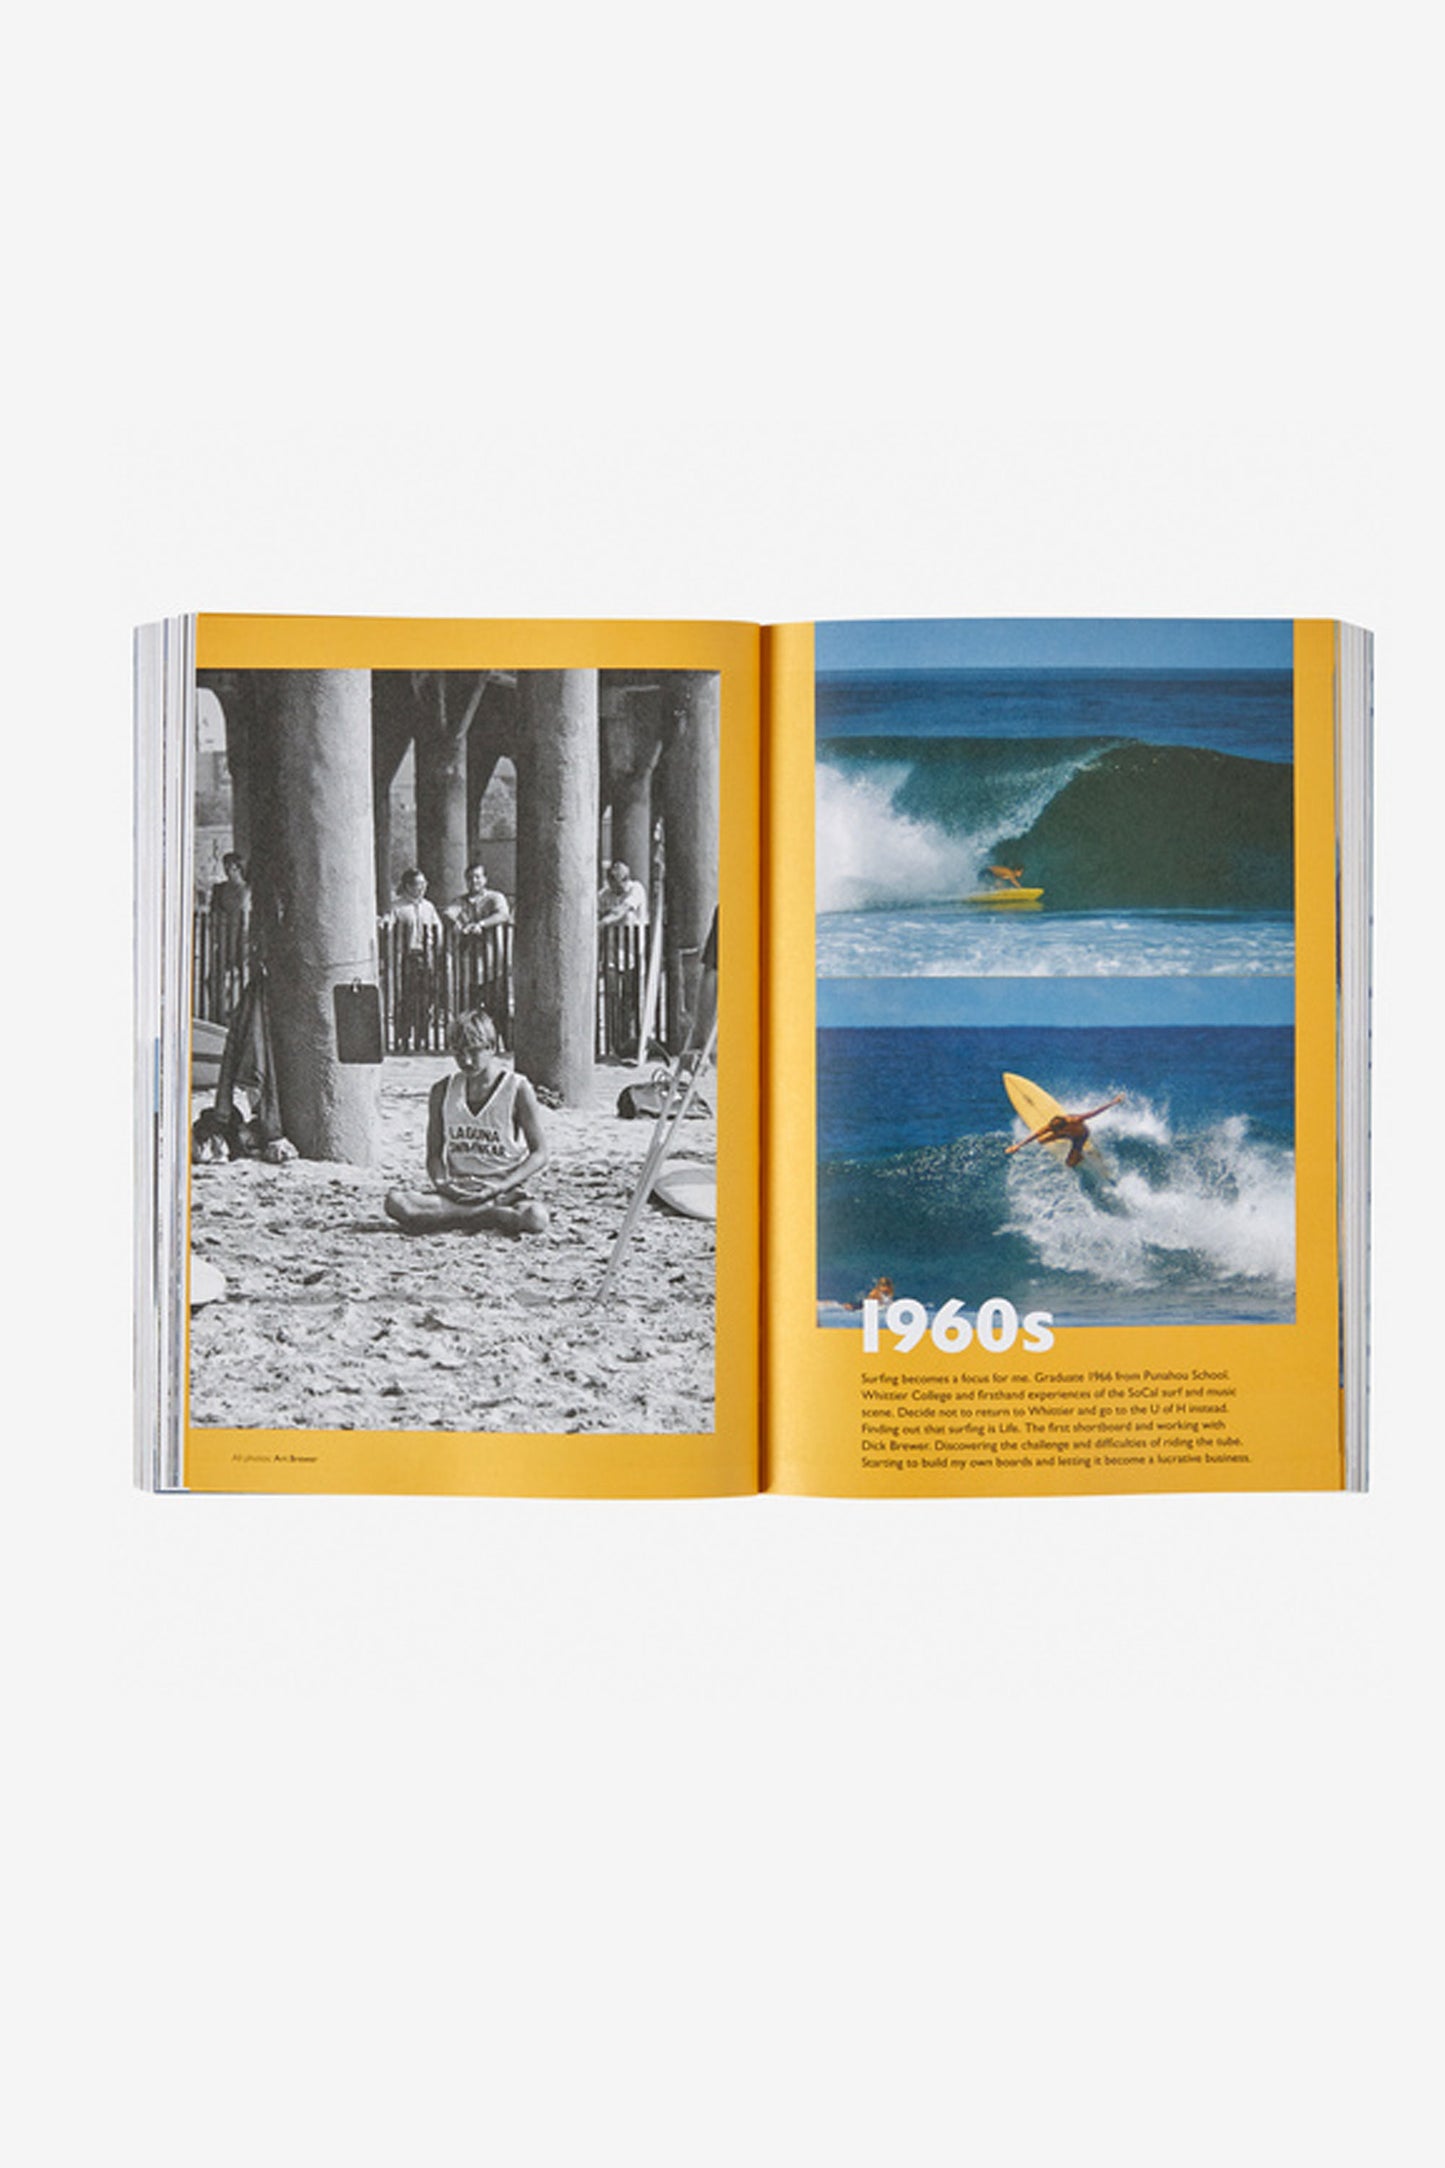 
                  
                    Pukas-surf-shop-book-surf-is-where-you-find-it
                  
                